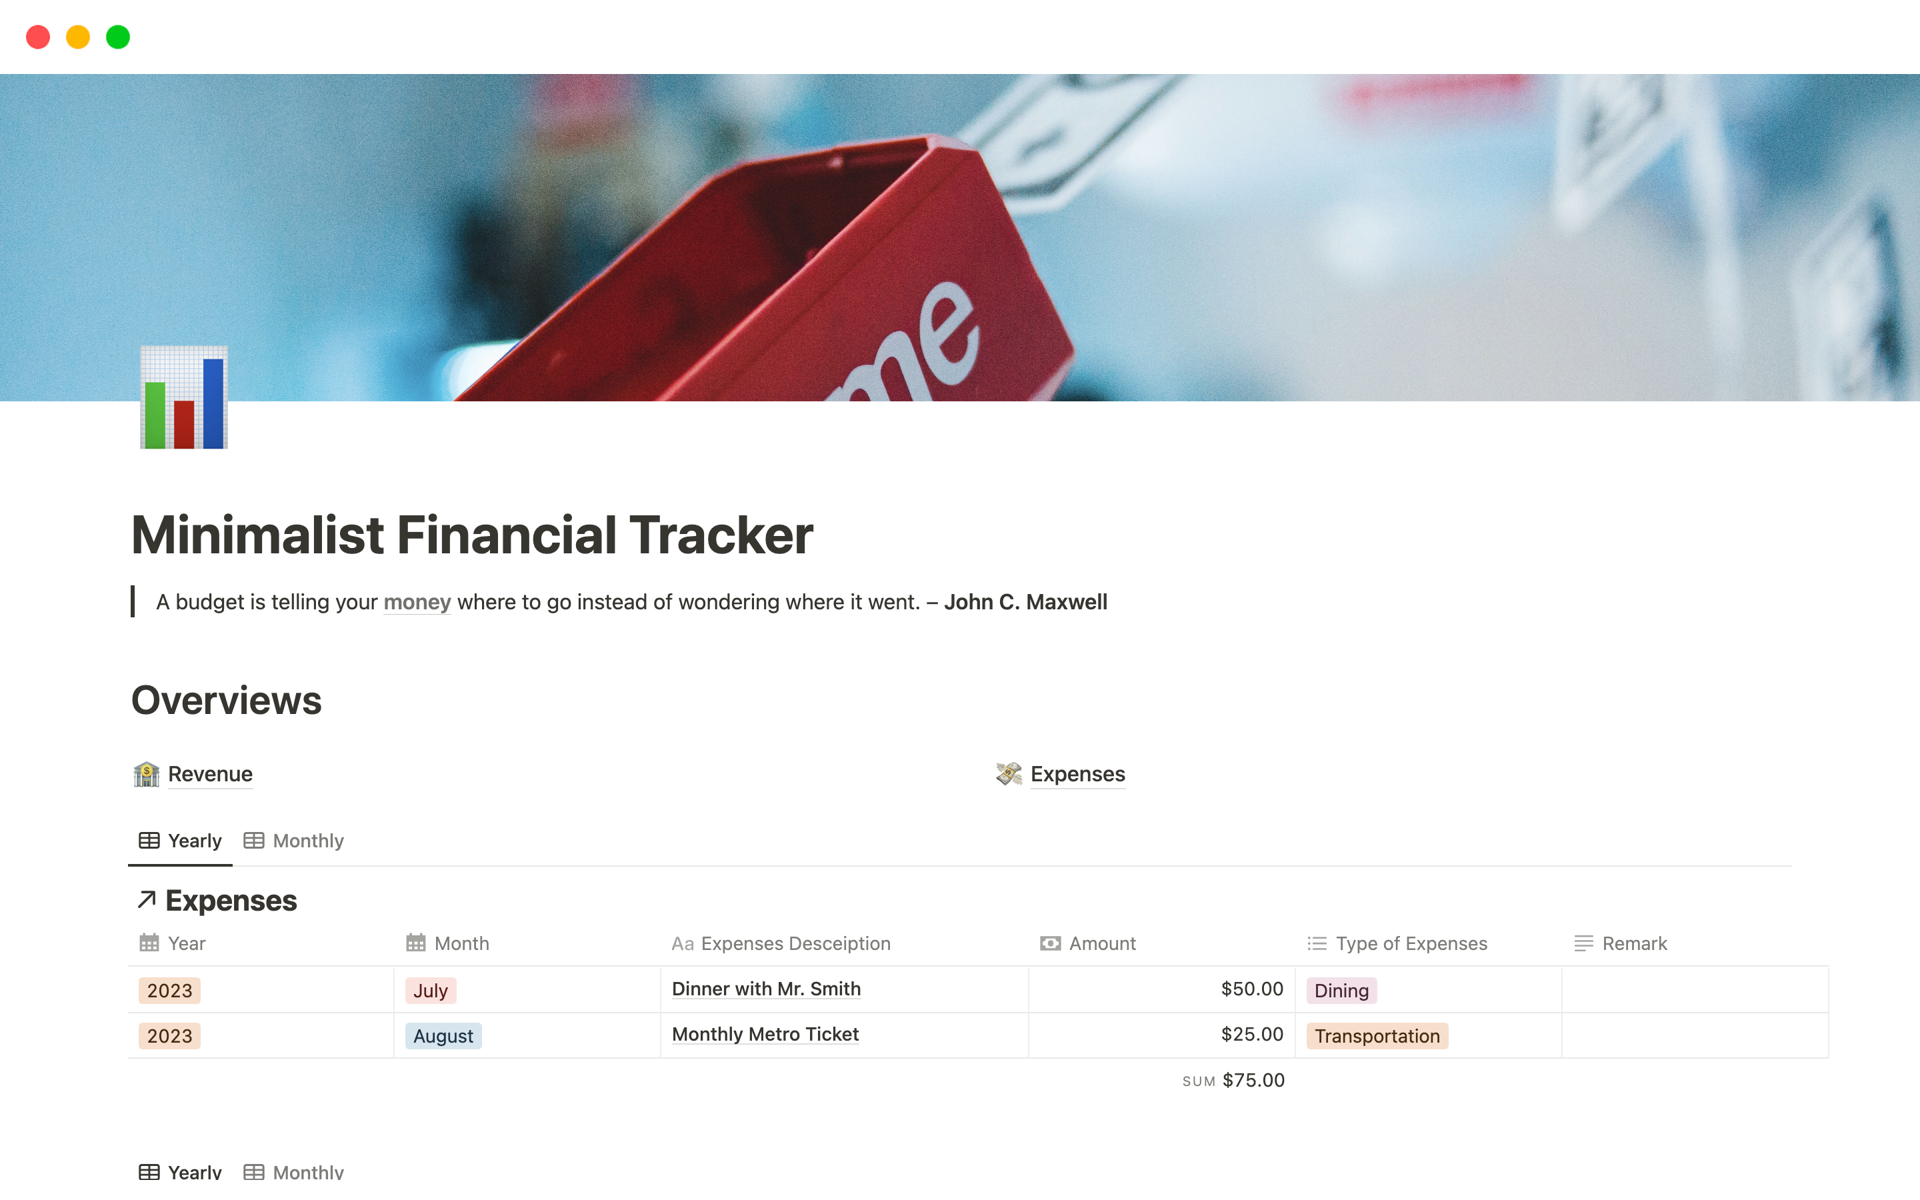 This is a minimalist Financial Tracker.